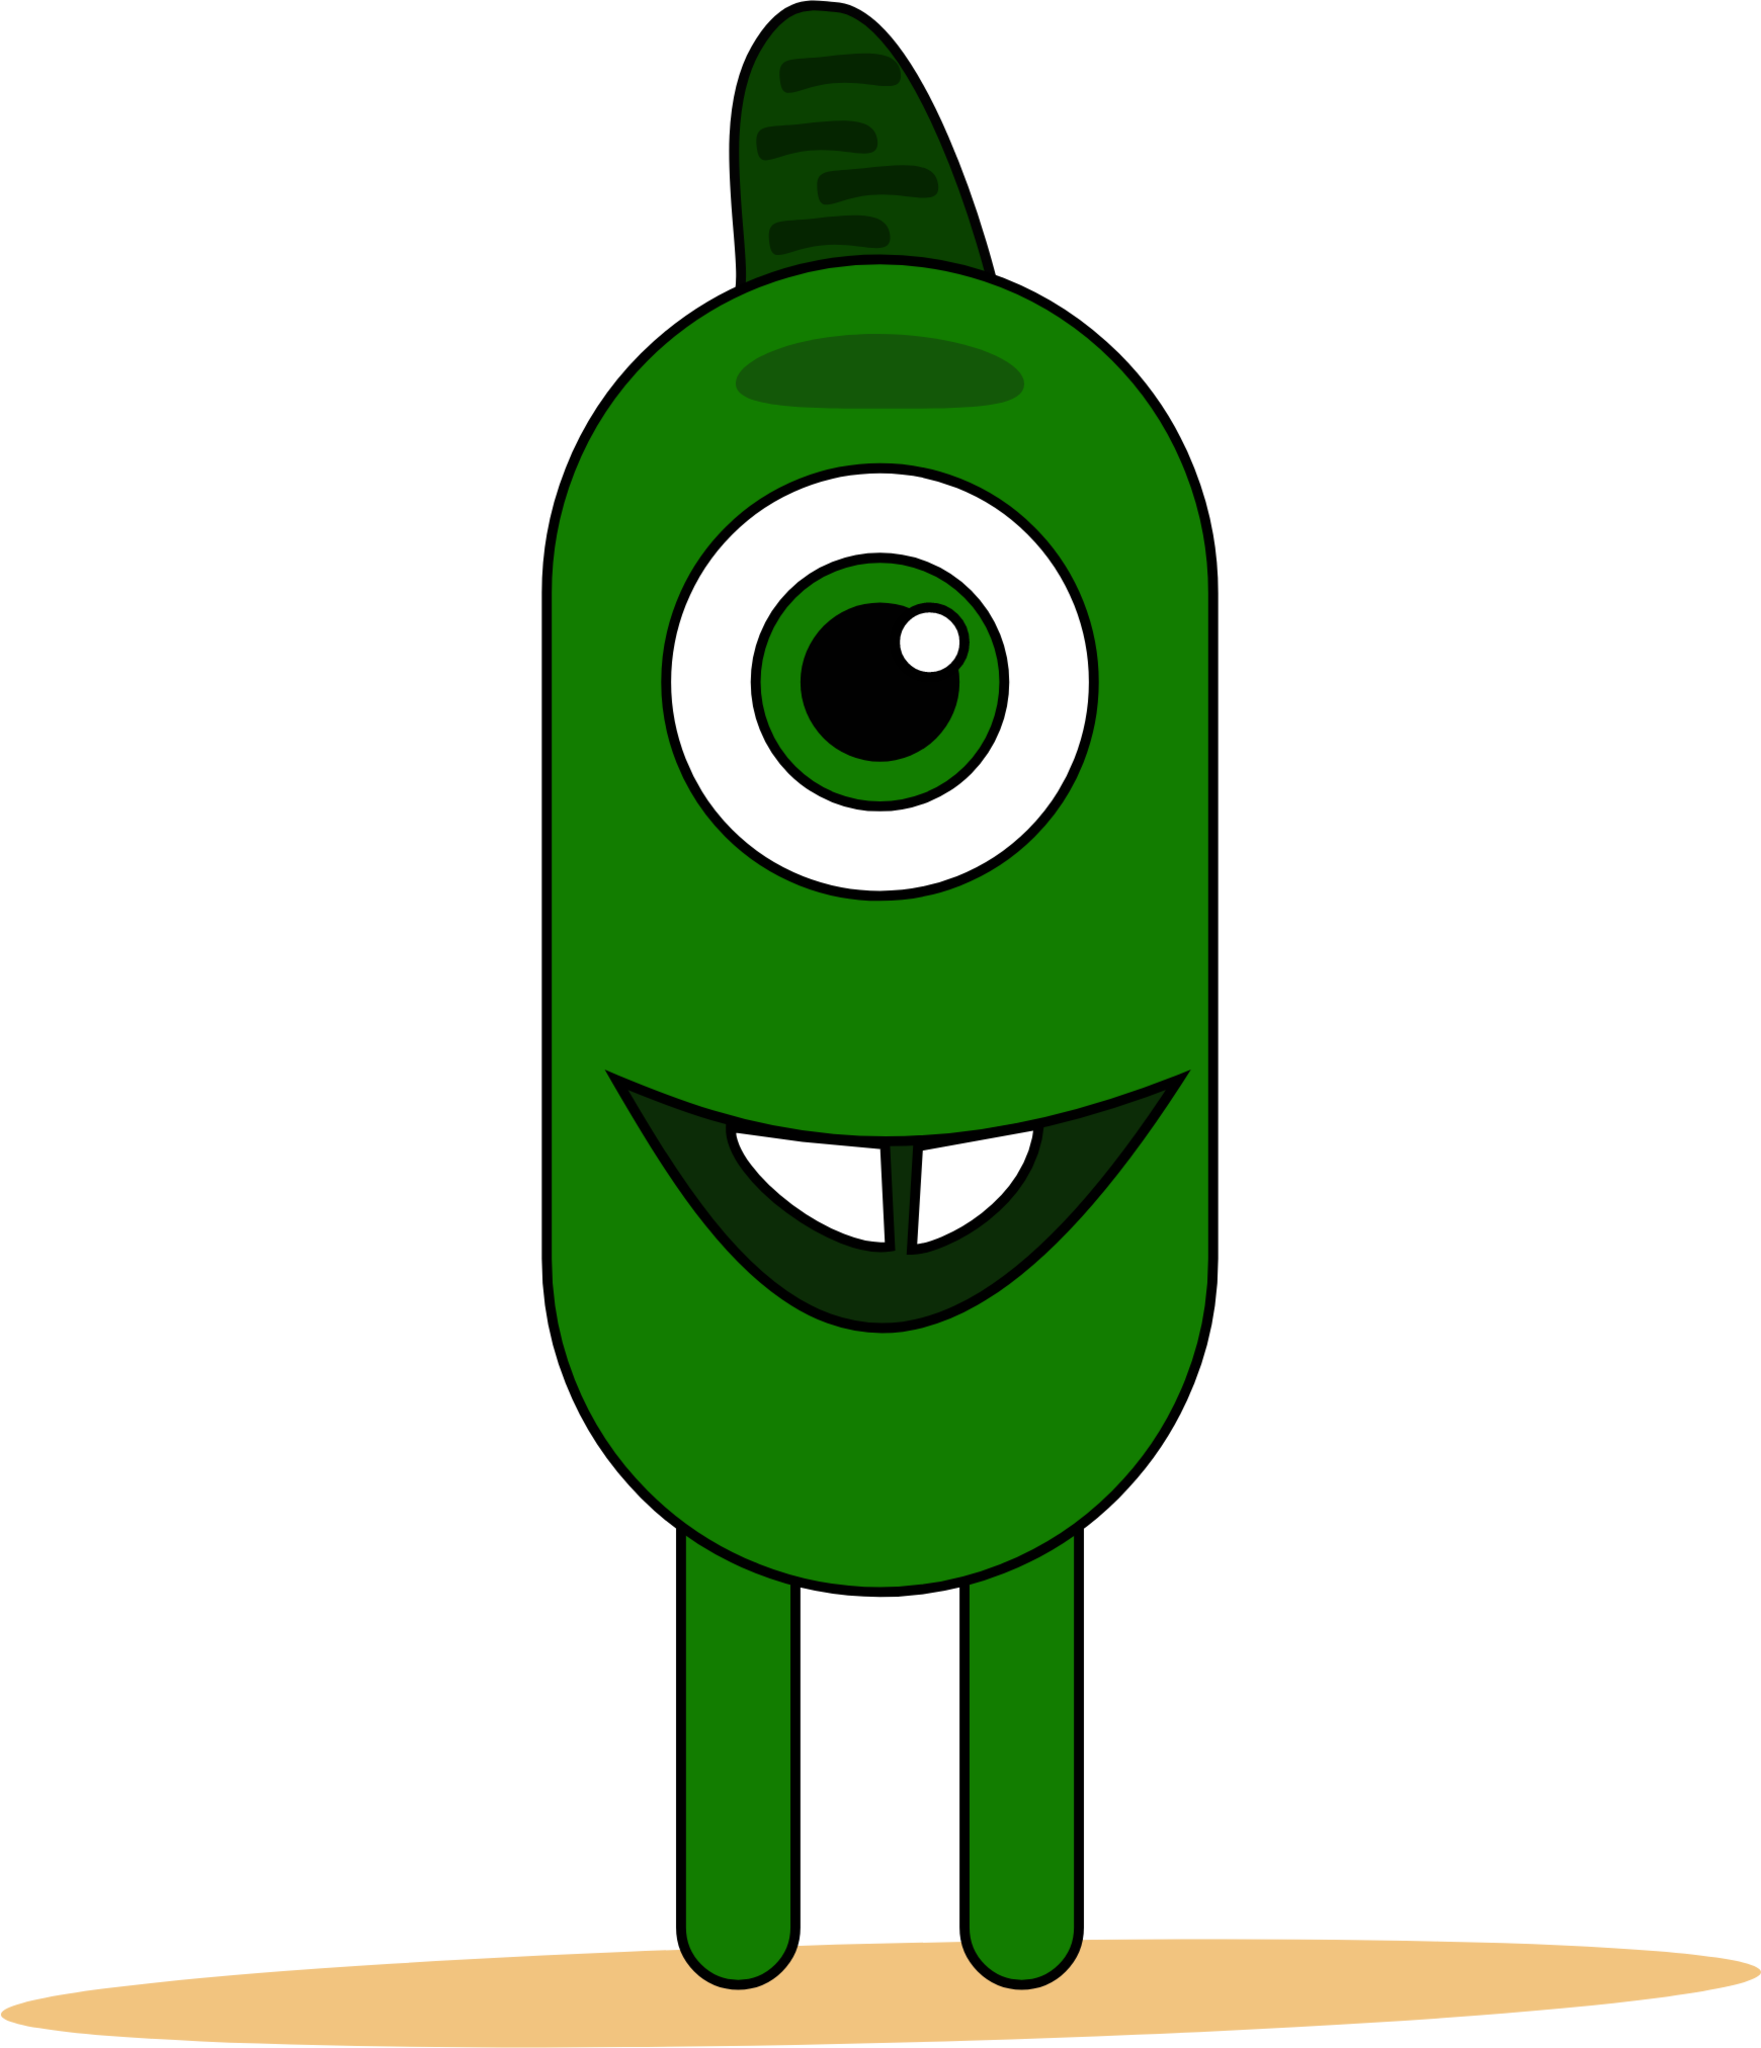 skinny green monster with one eye and horn icon